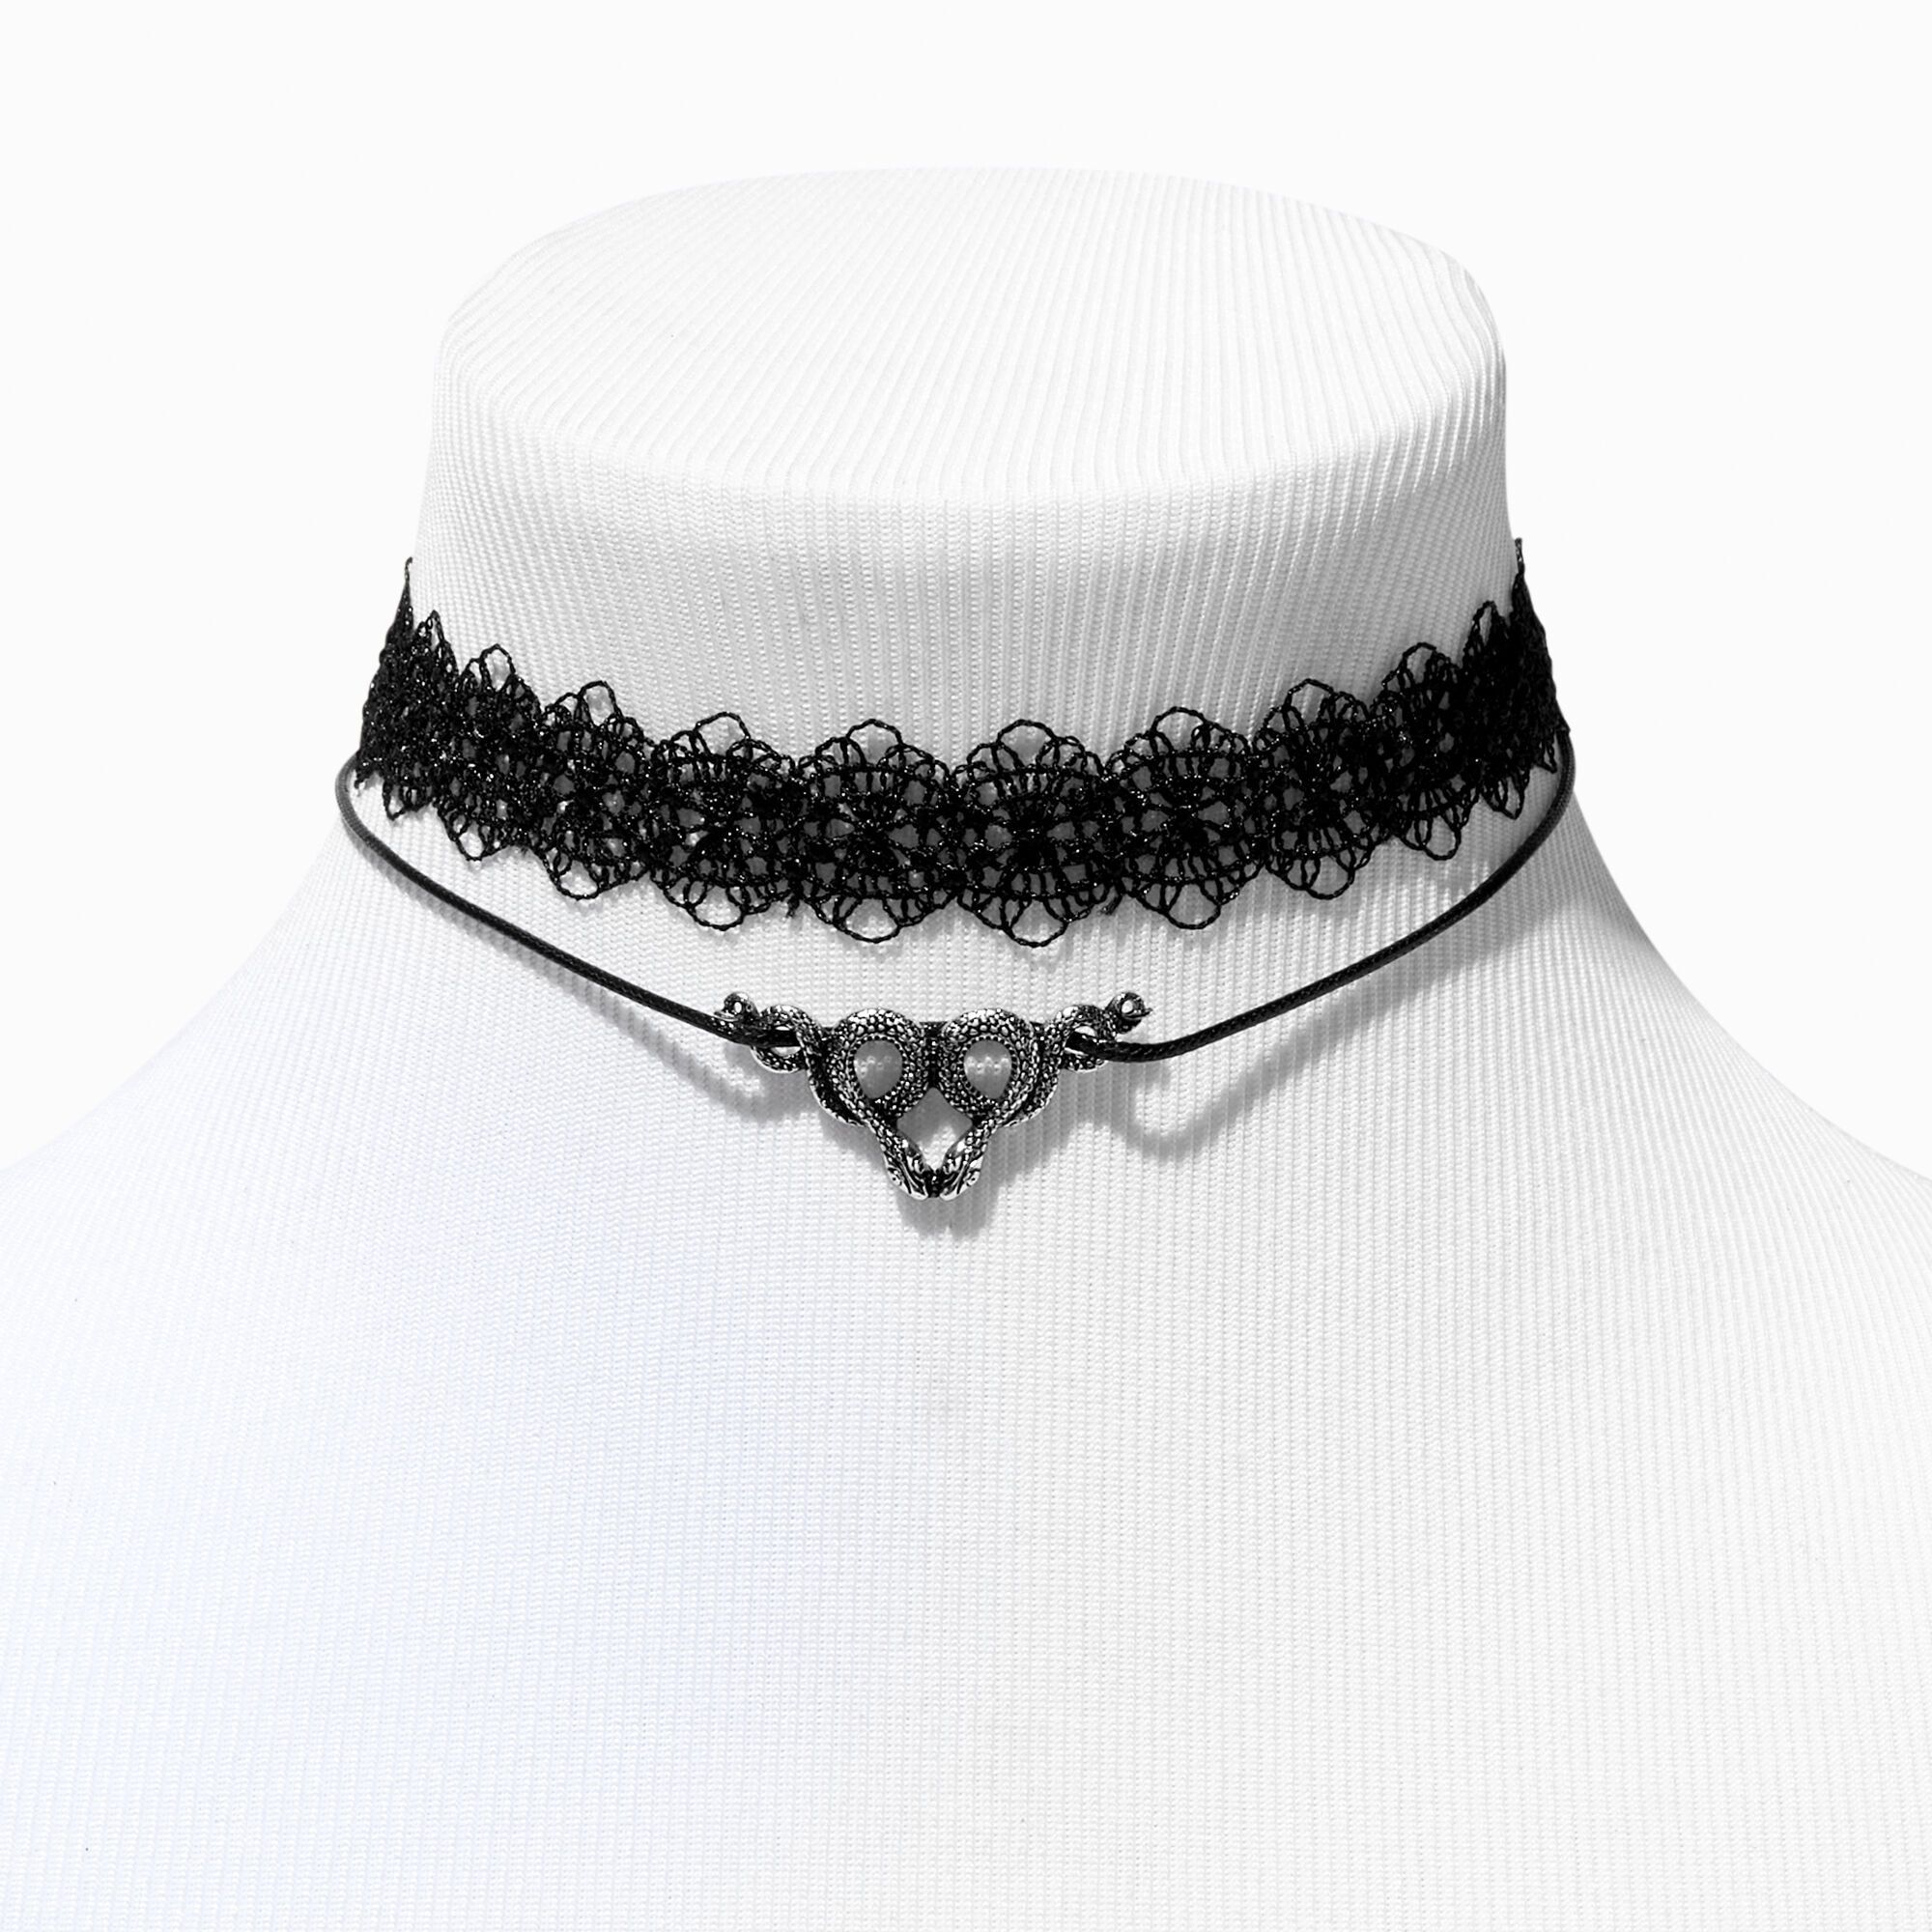 black choker necklace with silver heart pendant by jkfangirl on DeviantArt